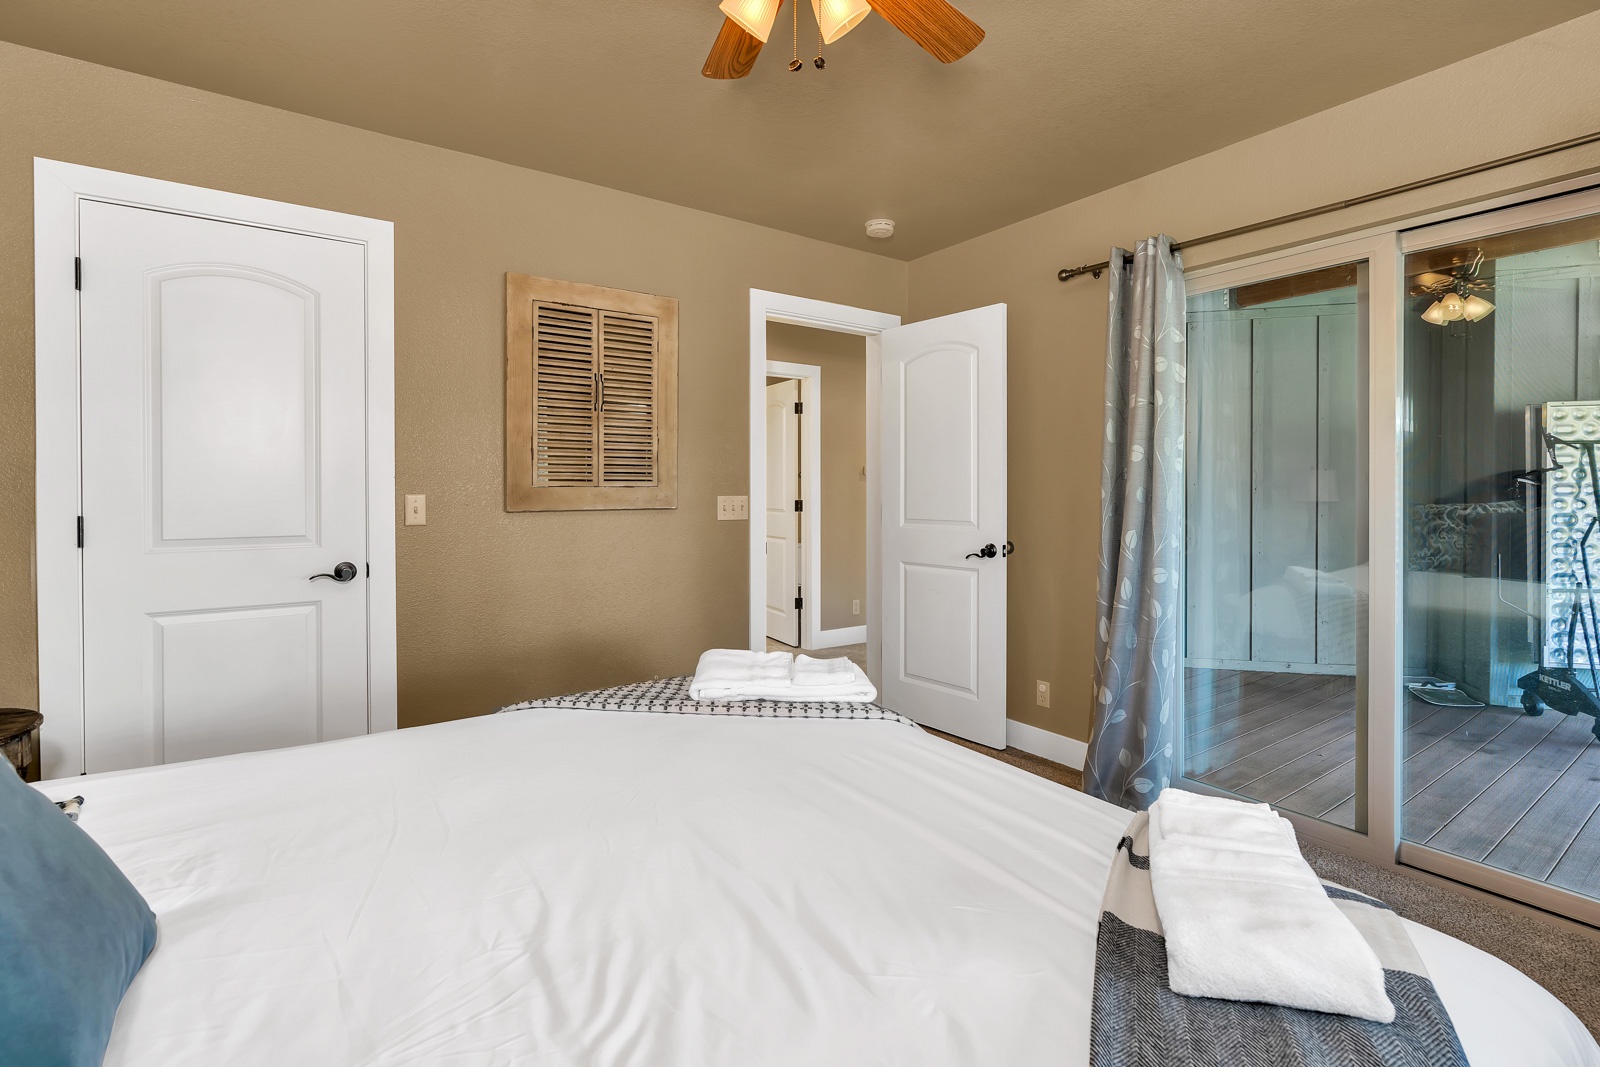 The lower-level king bedroom includes a Smart TV & access to the deck